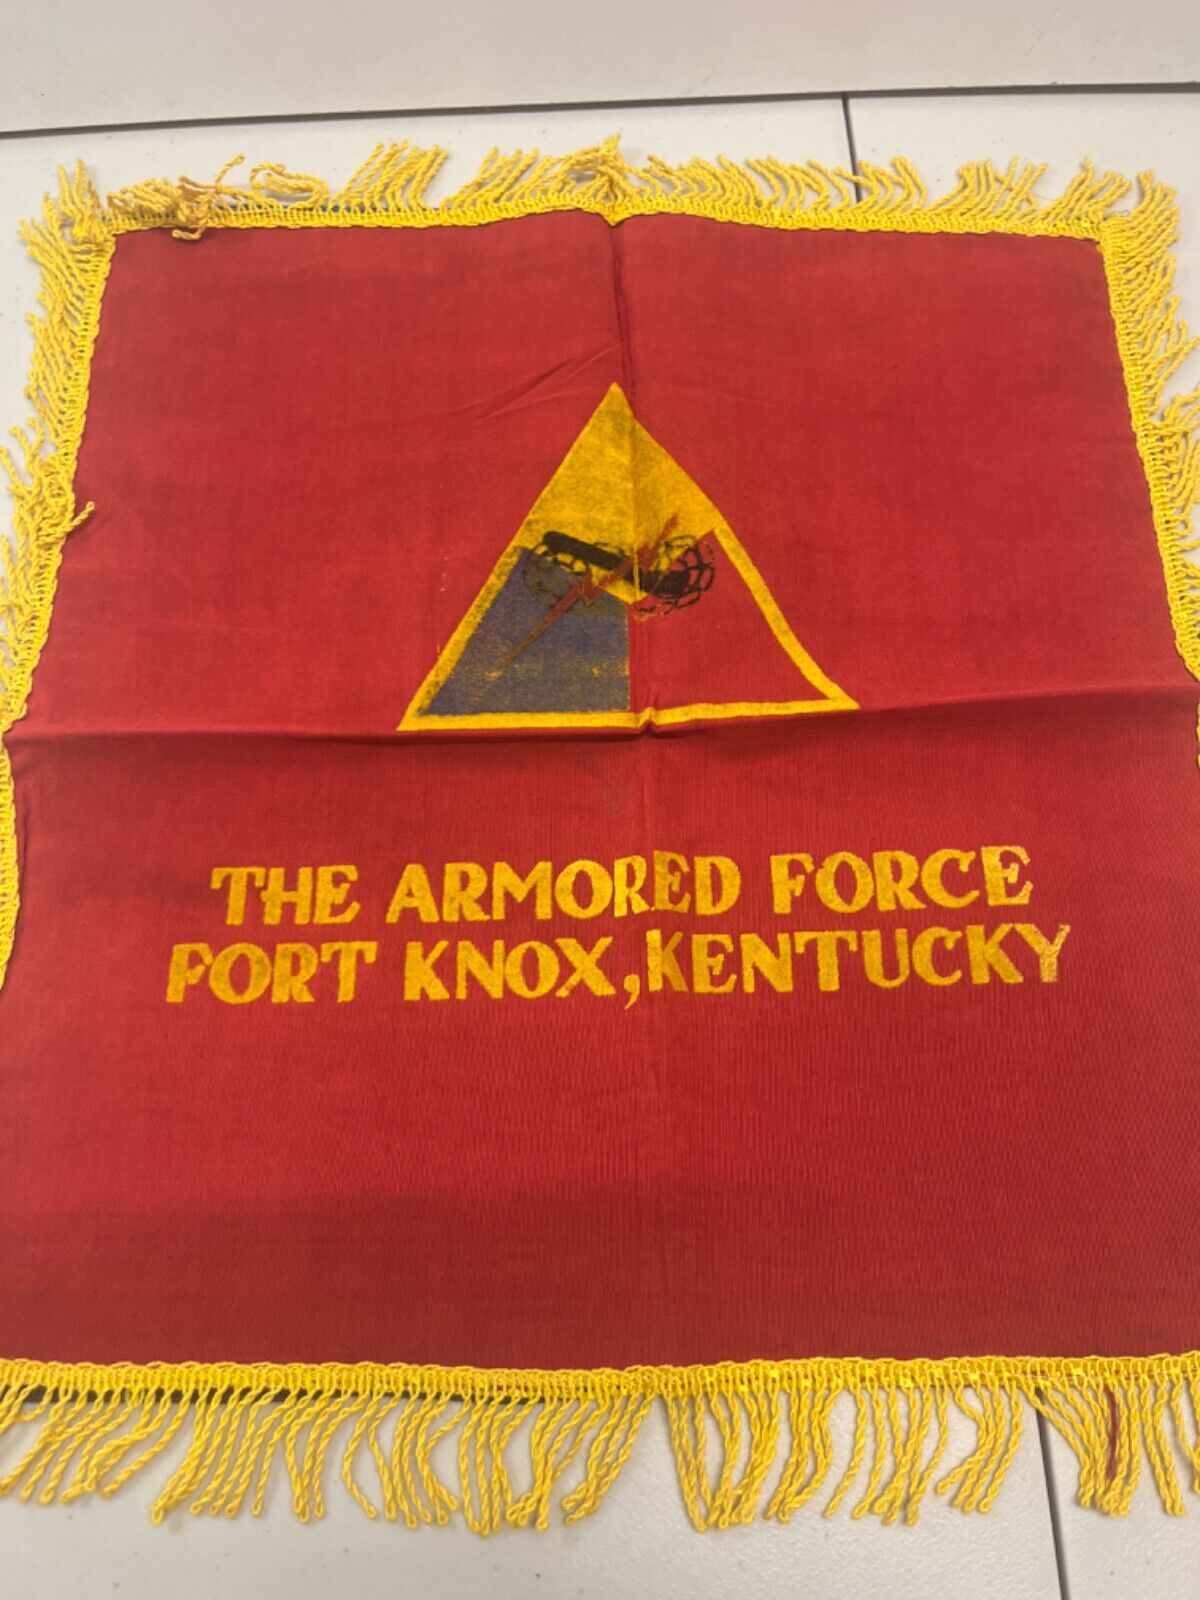 The Armored Force Ft. Knox Kentucky Pillow cover